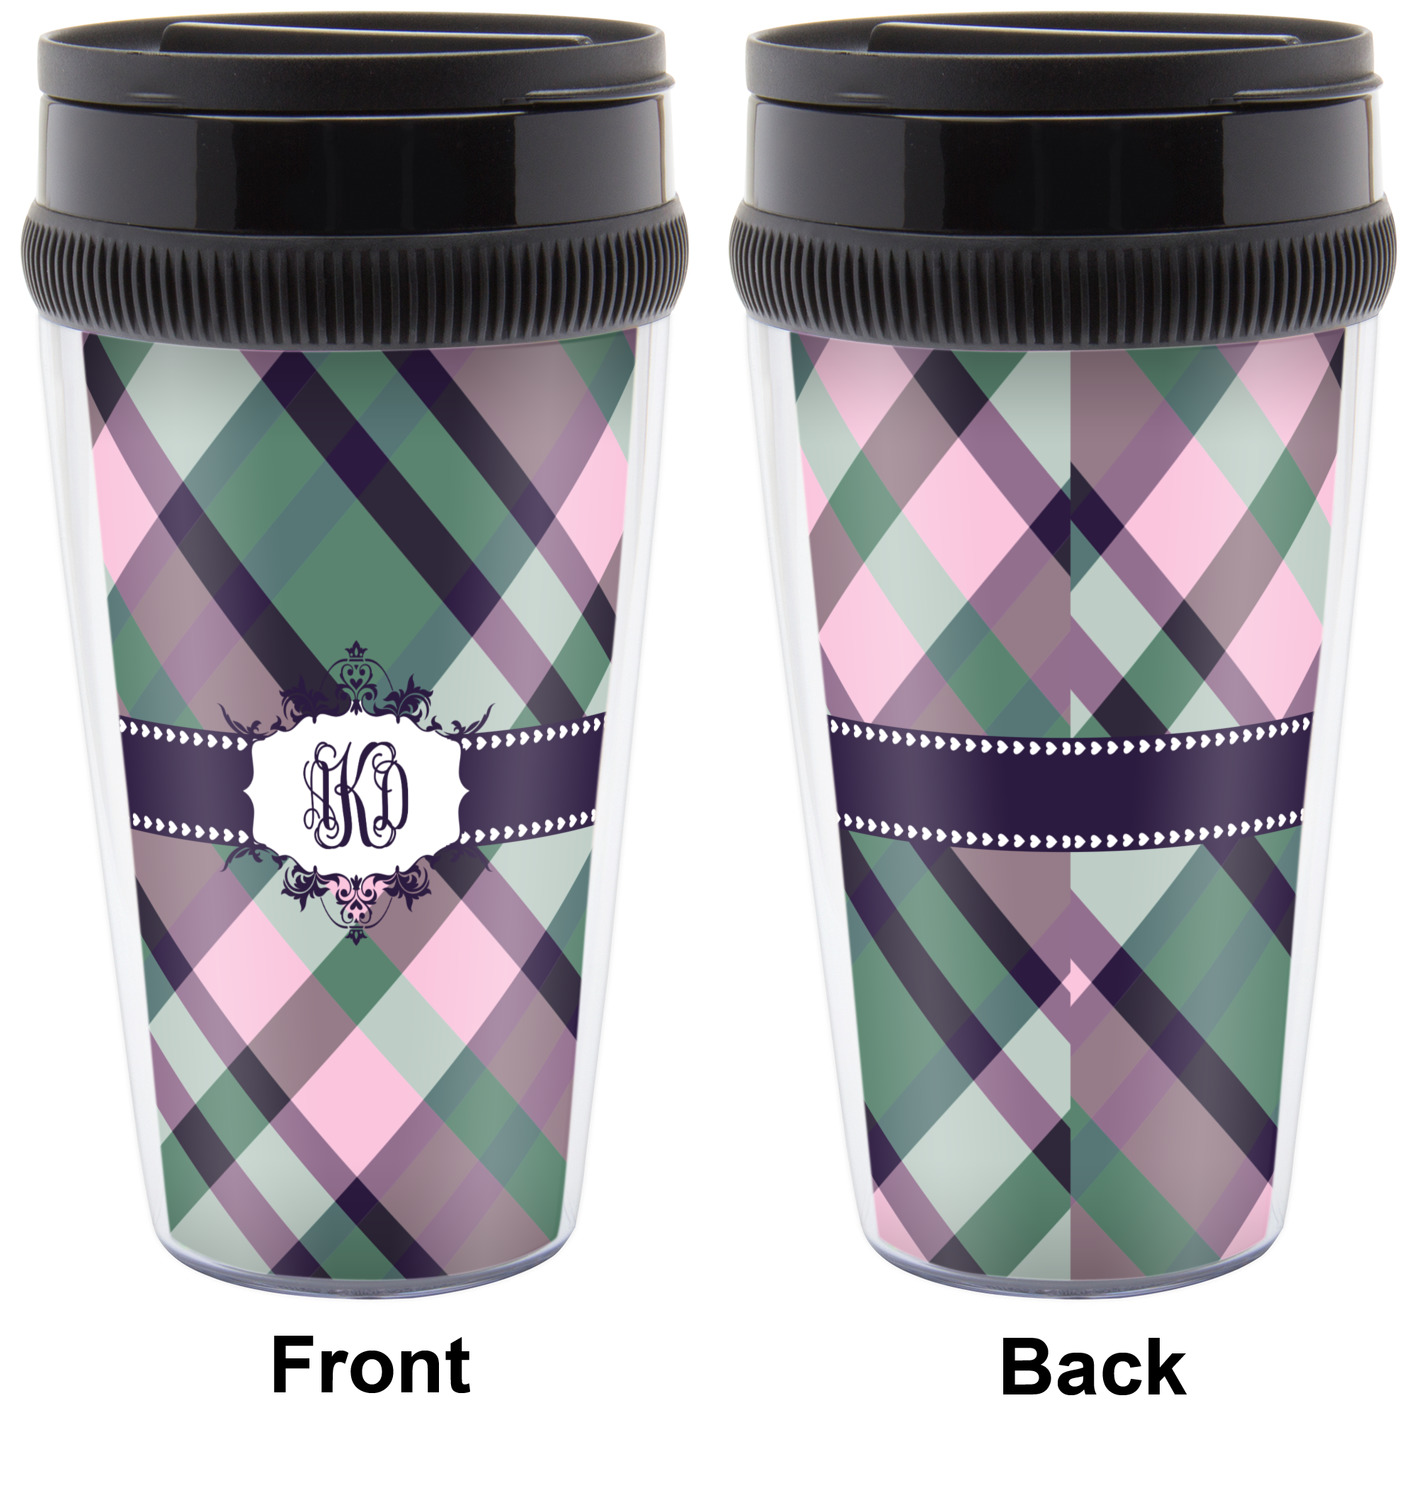 https://www.youcustomizeit.com/common/MAKE/200998/Plaid-with-Pop-Travel-Mug-Approval-Personalized.jpg?lm=1671207508